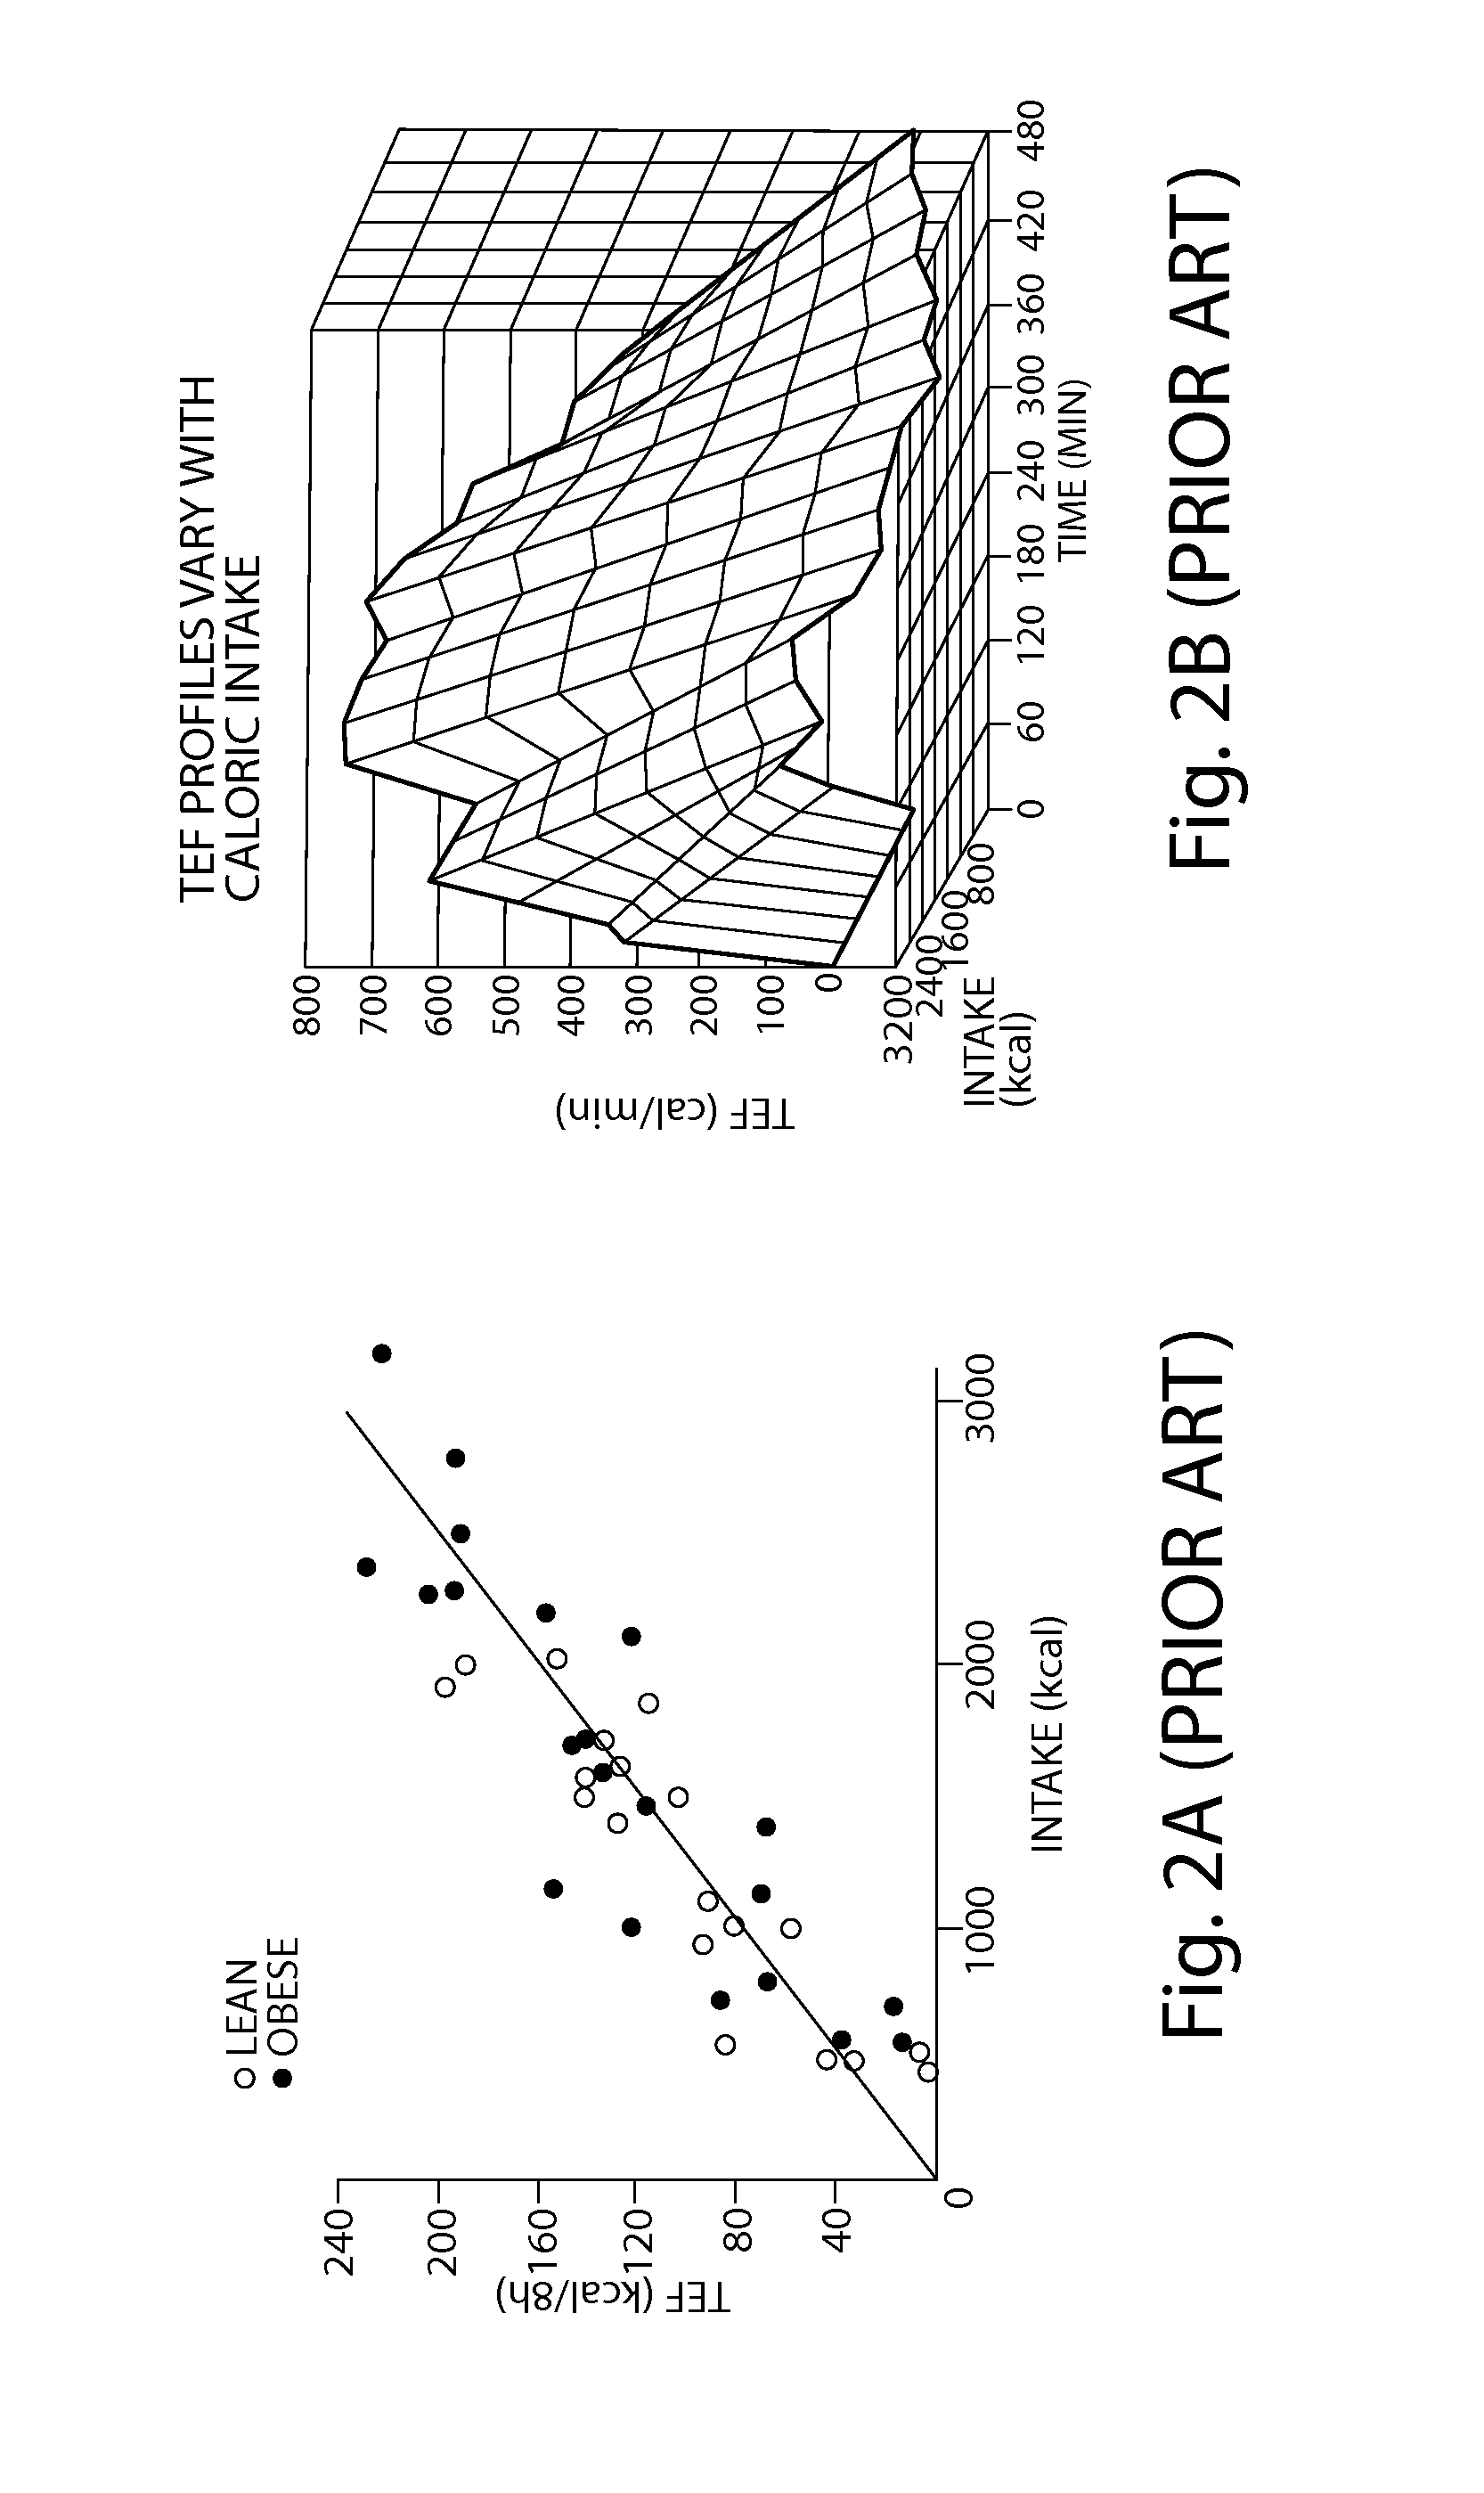 System and method of approximating caloric energy intake and/or macronutrient composition